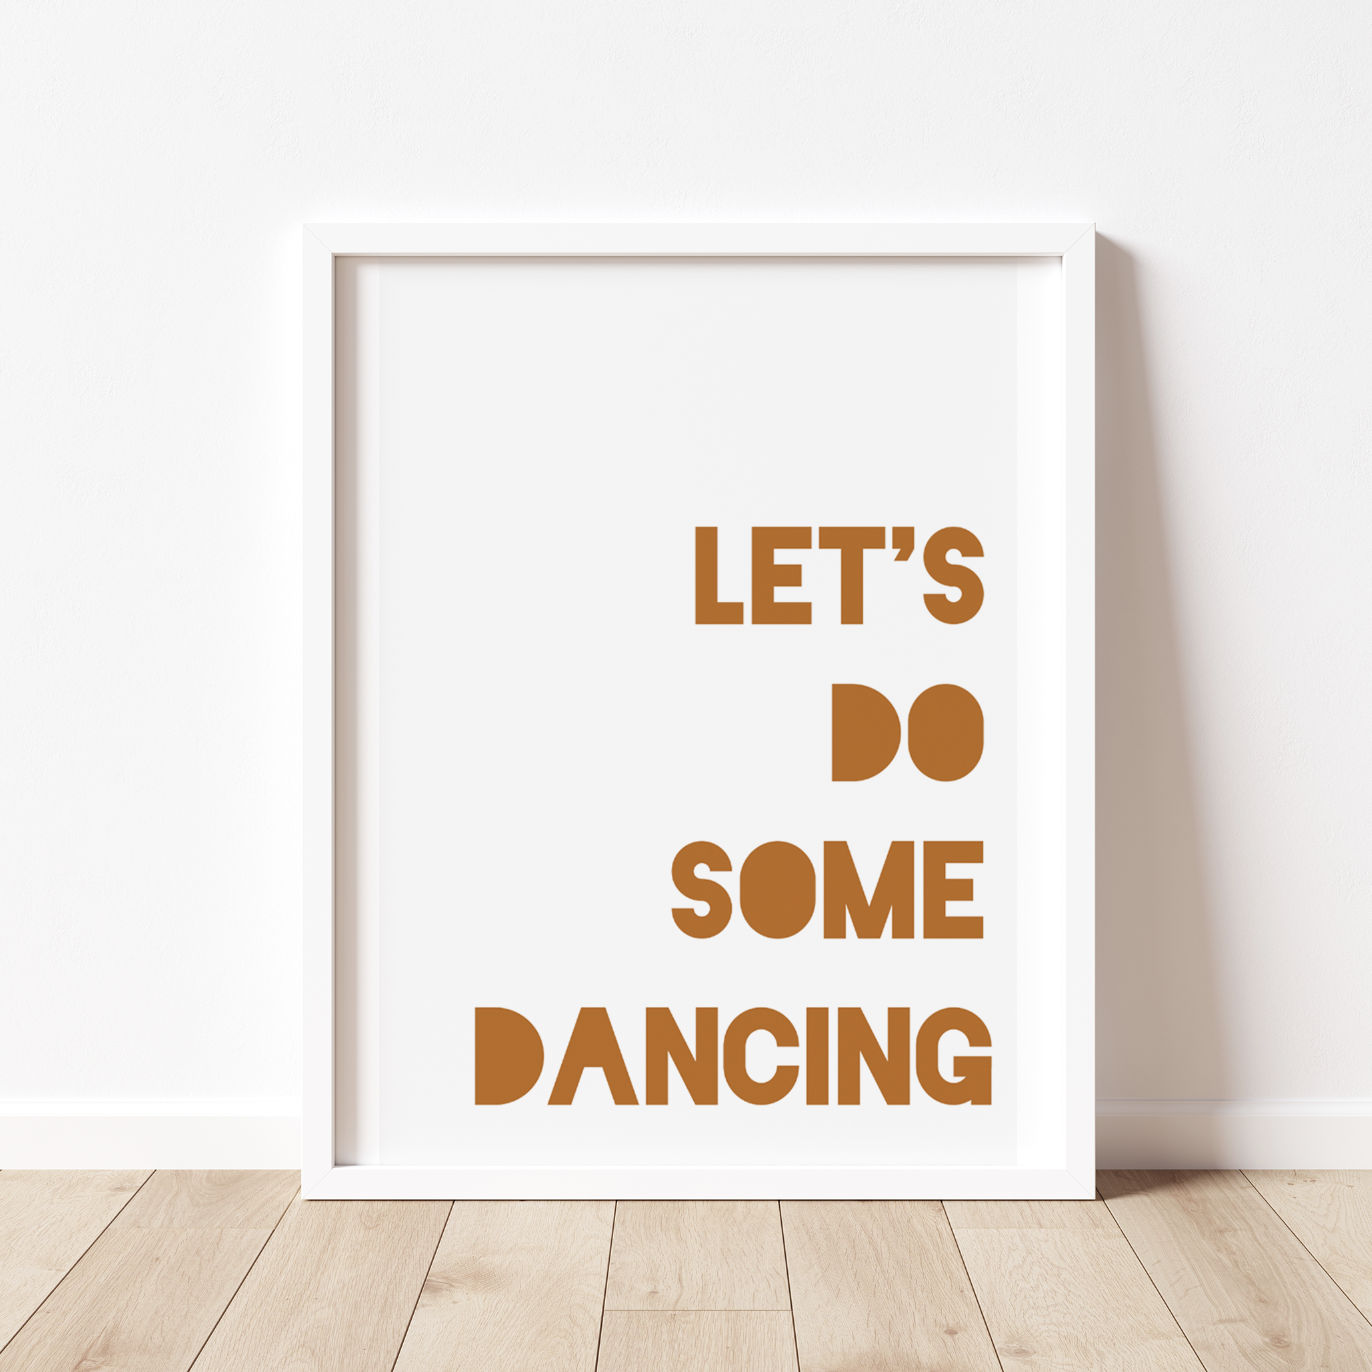 LET'S DO SOME DANCING Print